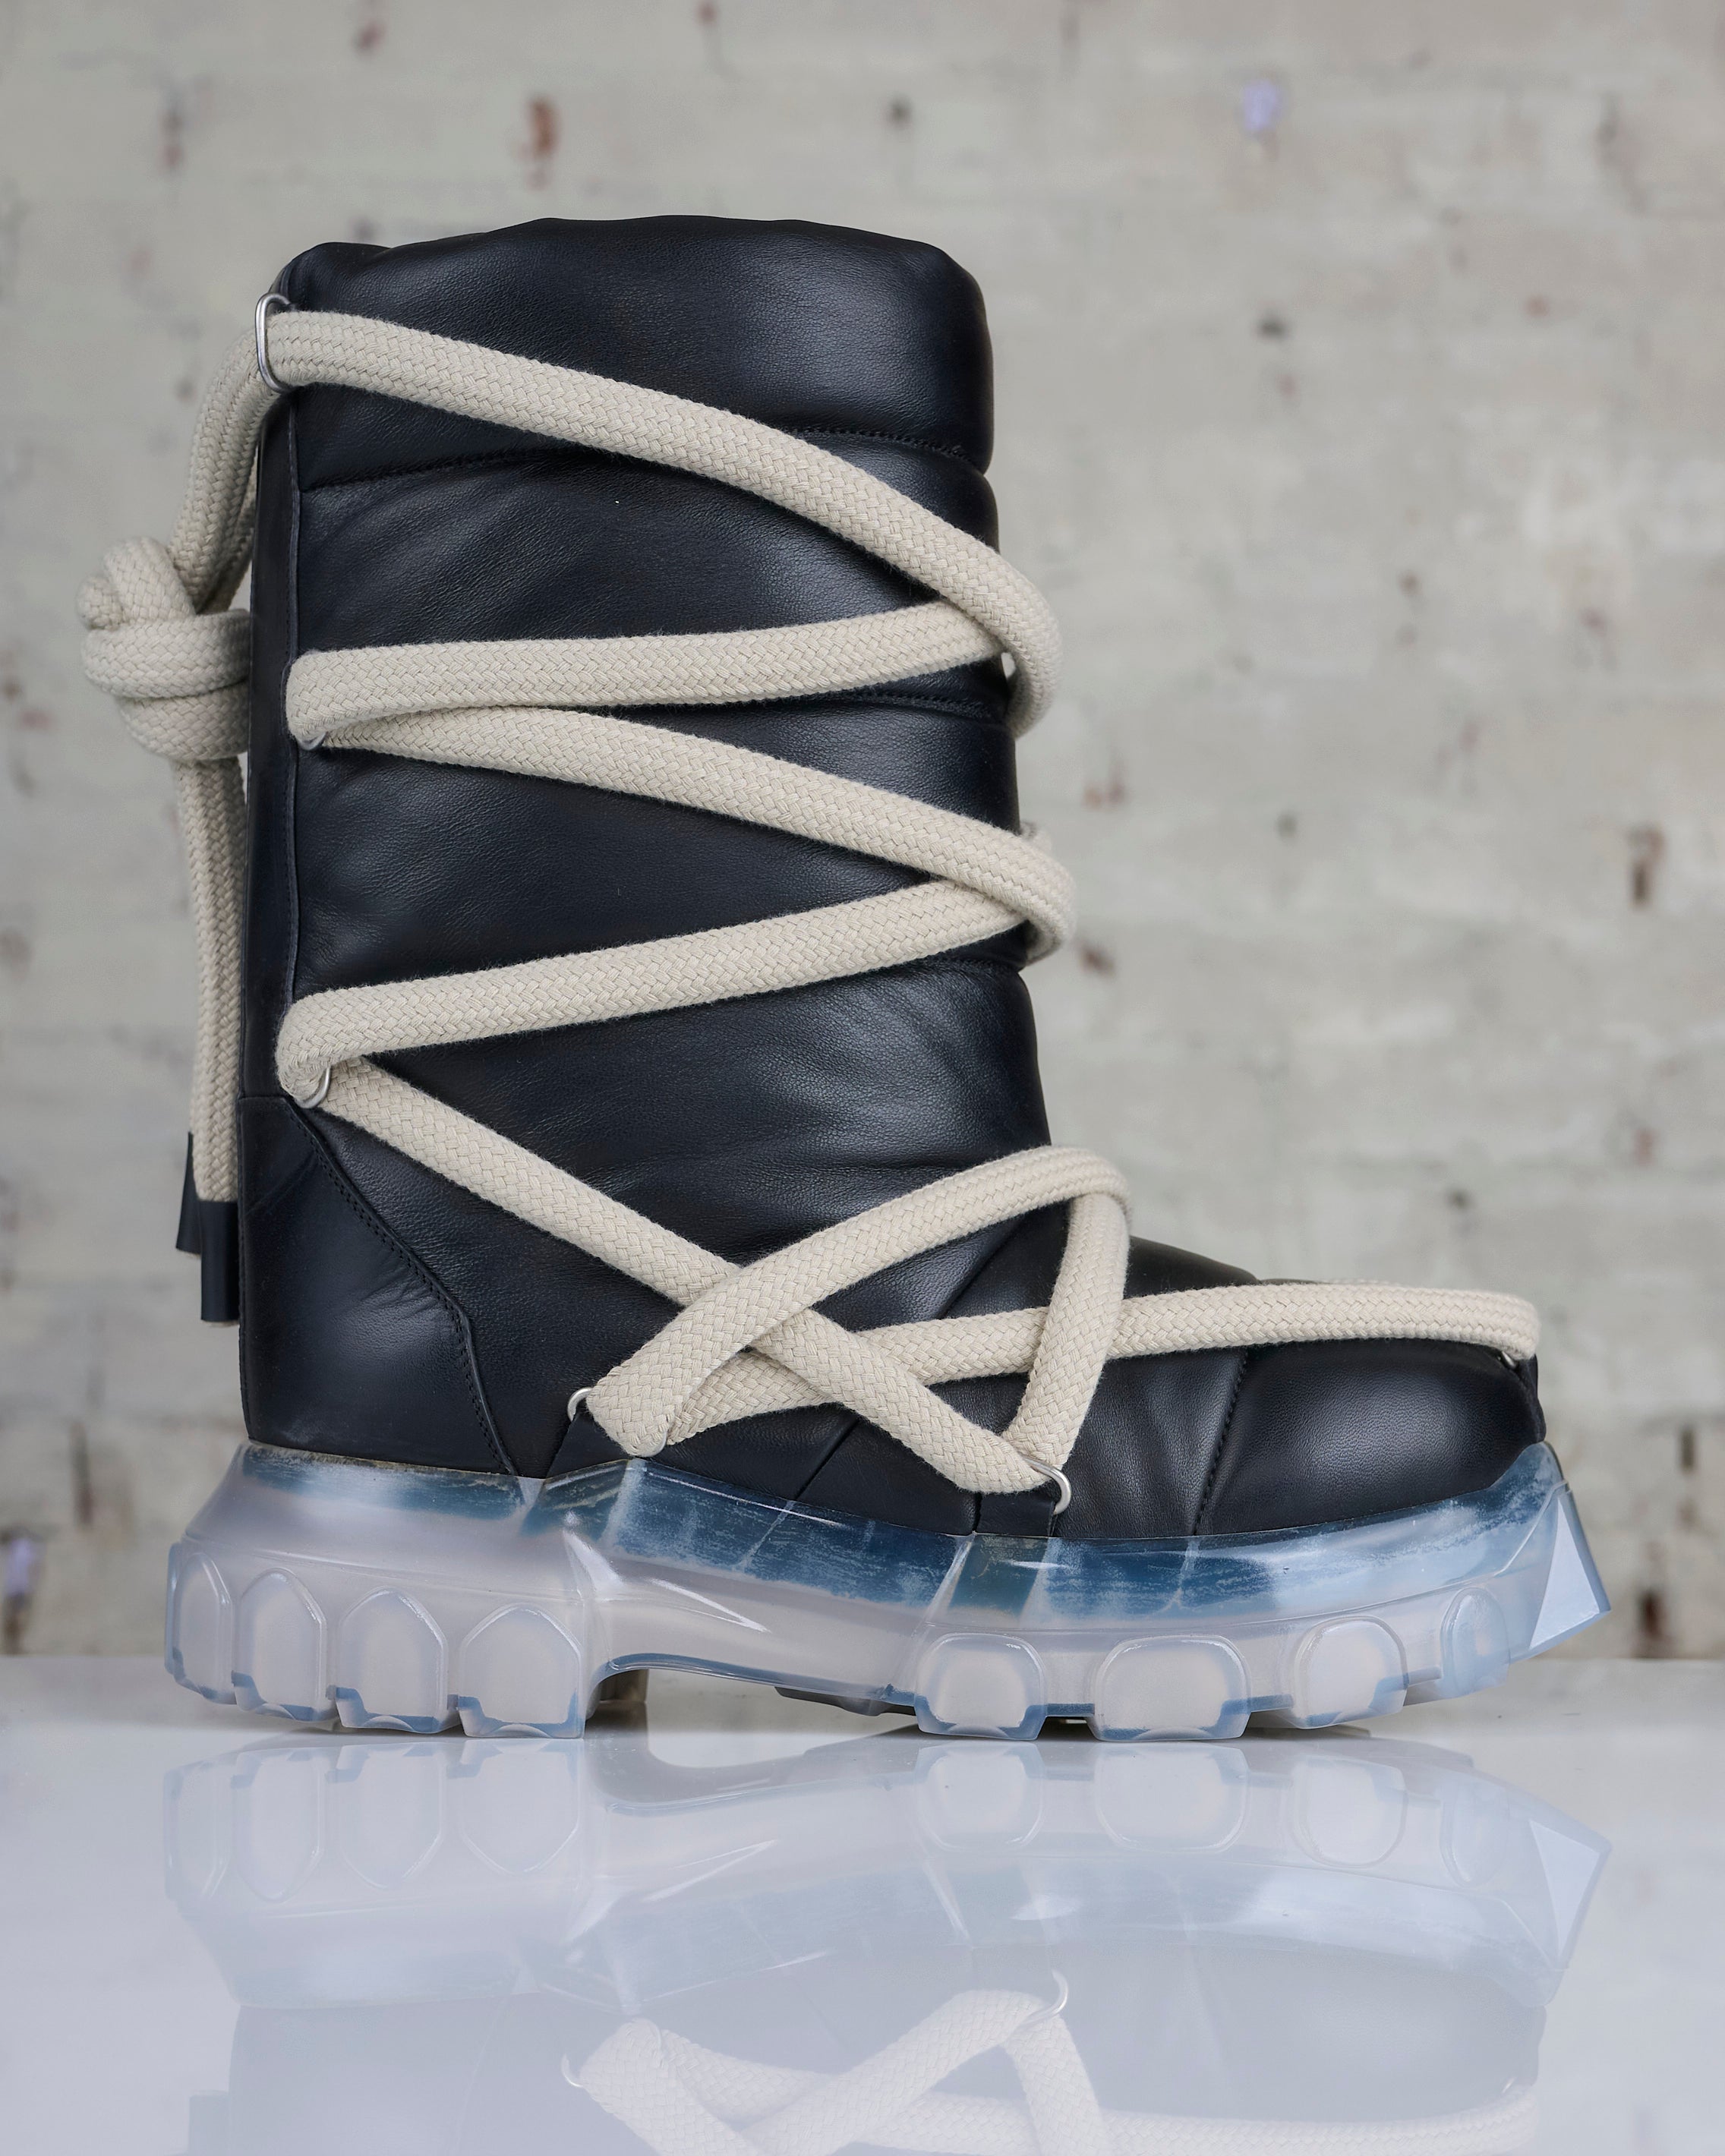 Rick Owens tractor boots 42 - ブーツ